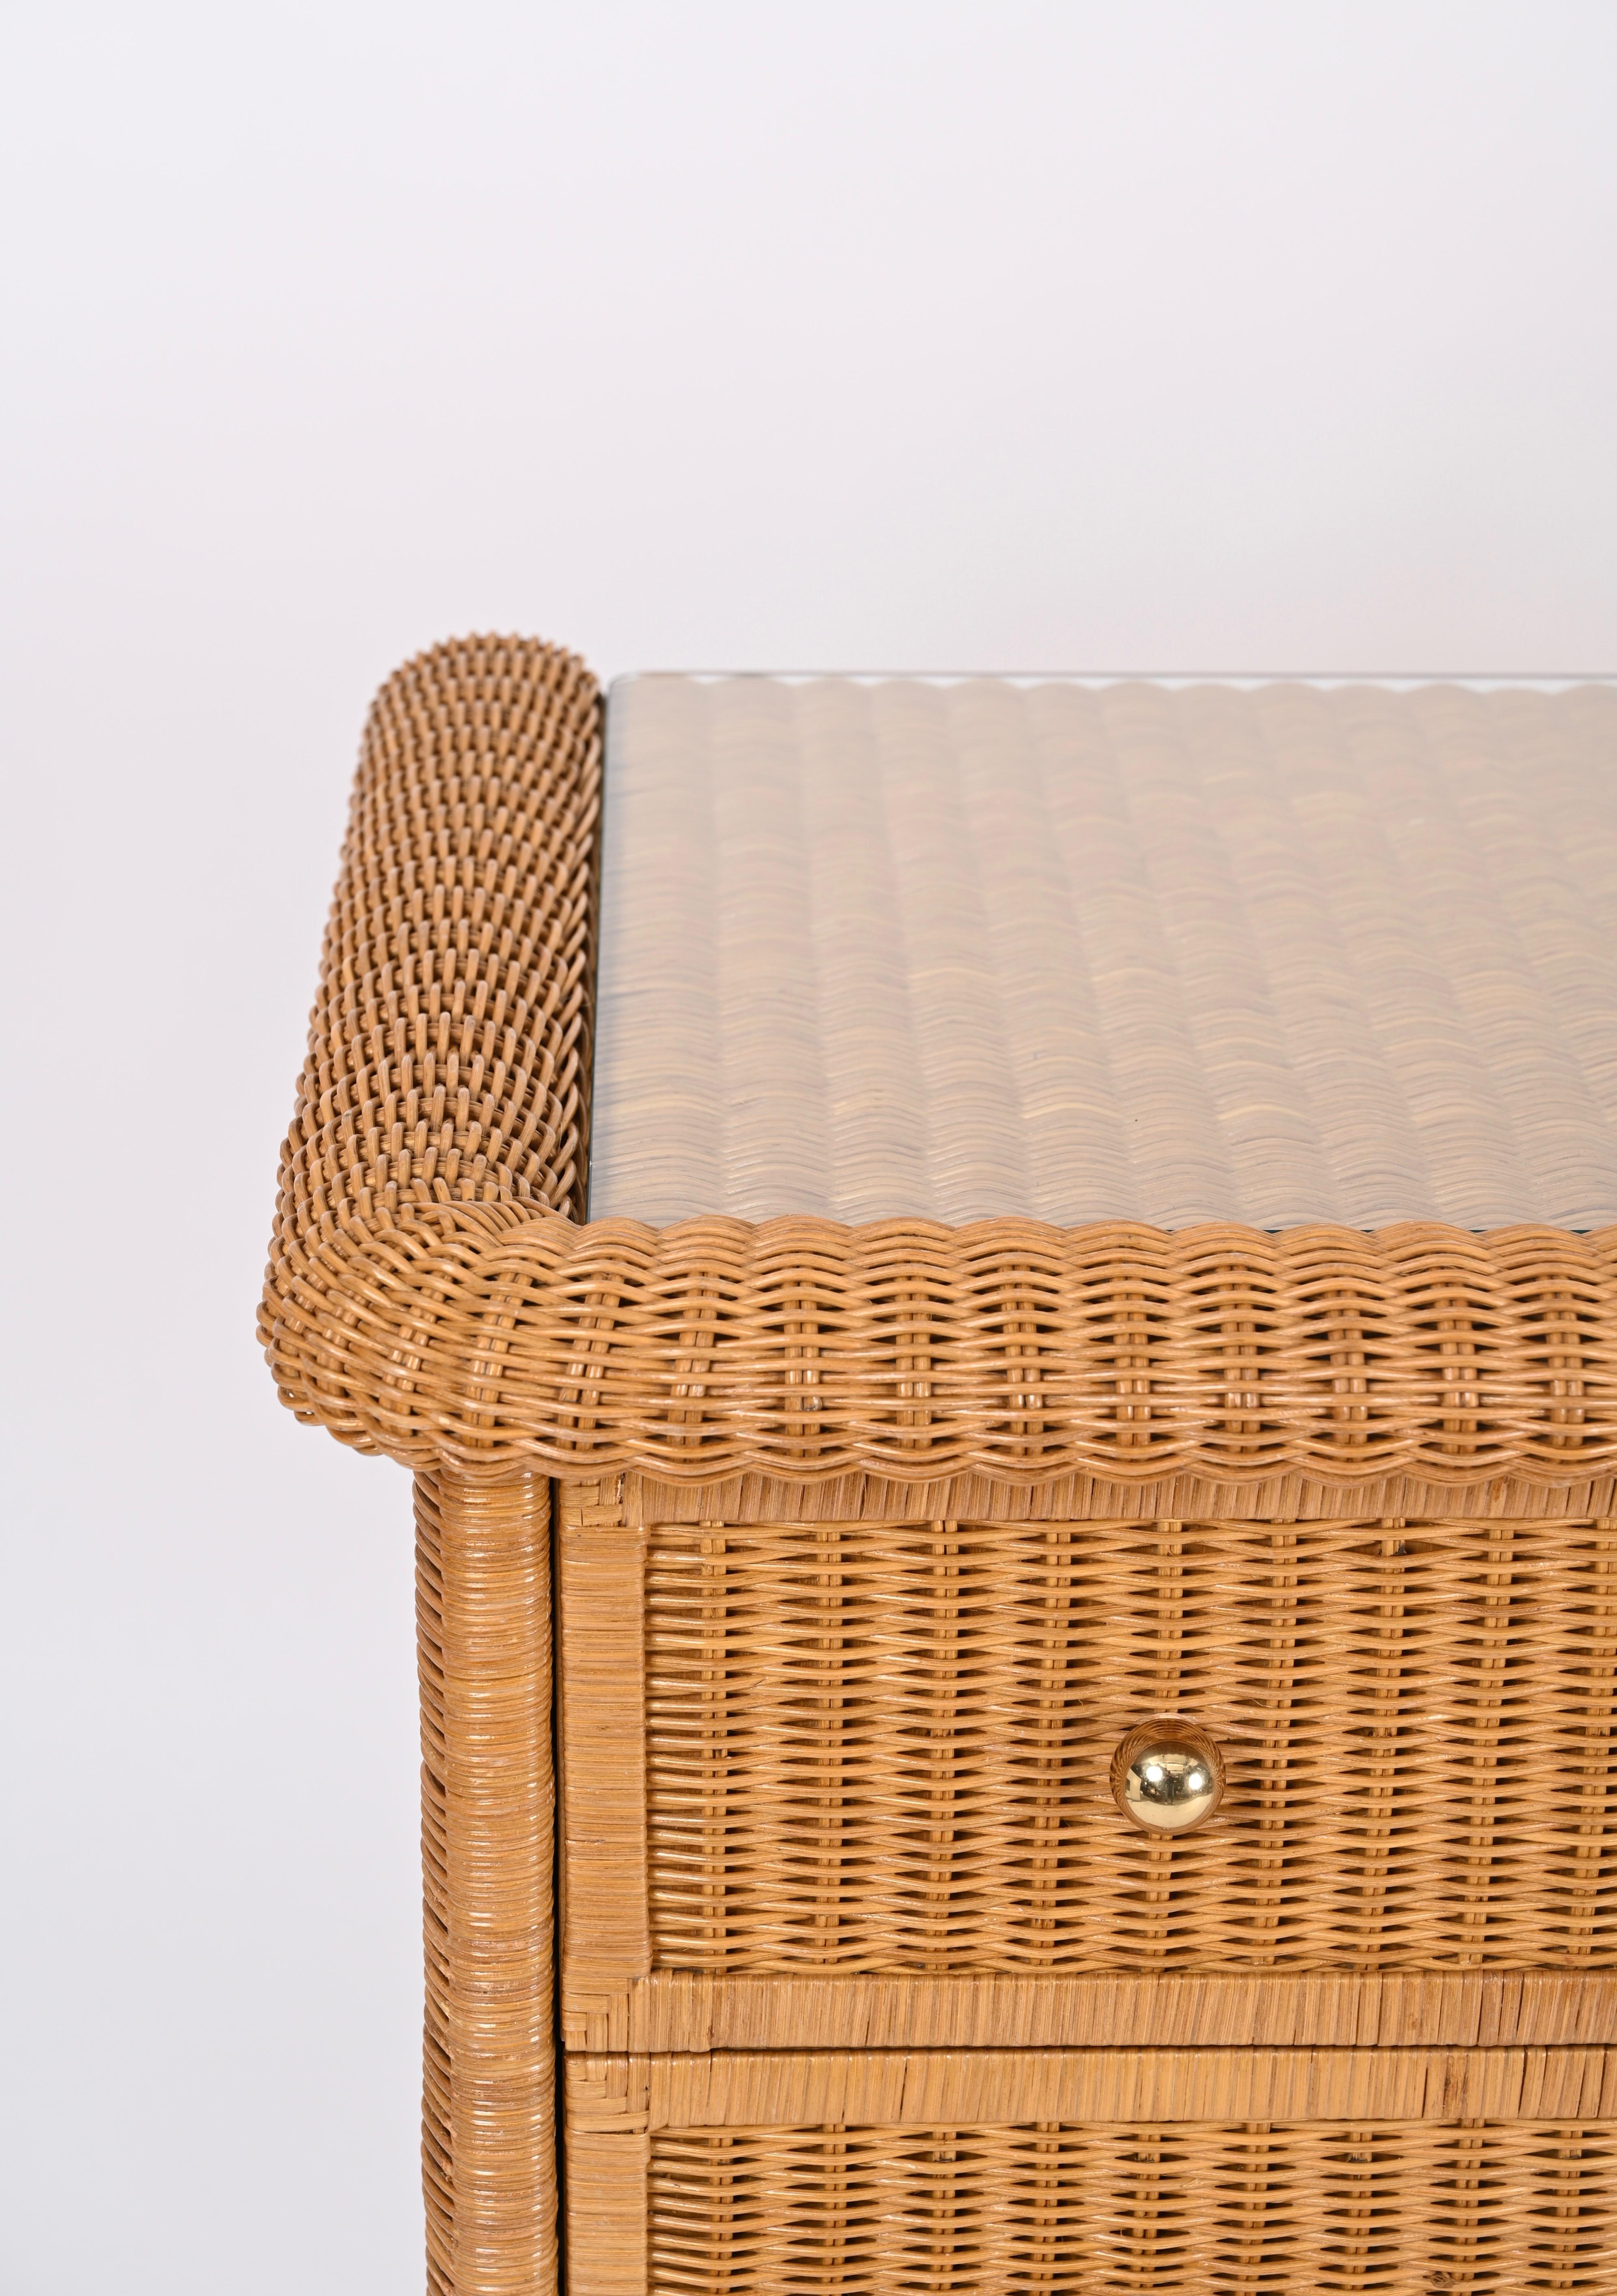 Mid-Century Modern French Riviera Chest of Drawers in Woven Rattan by Vivai del Sud, Italy, 1970s For Sale